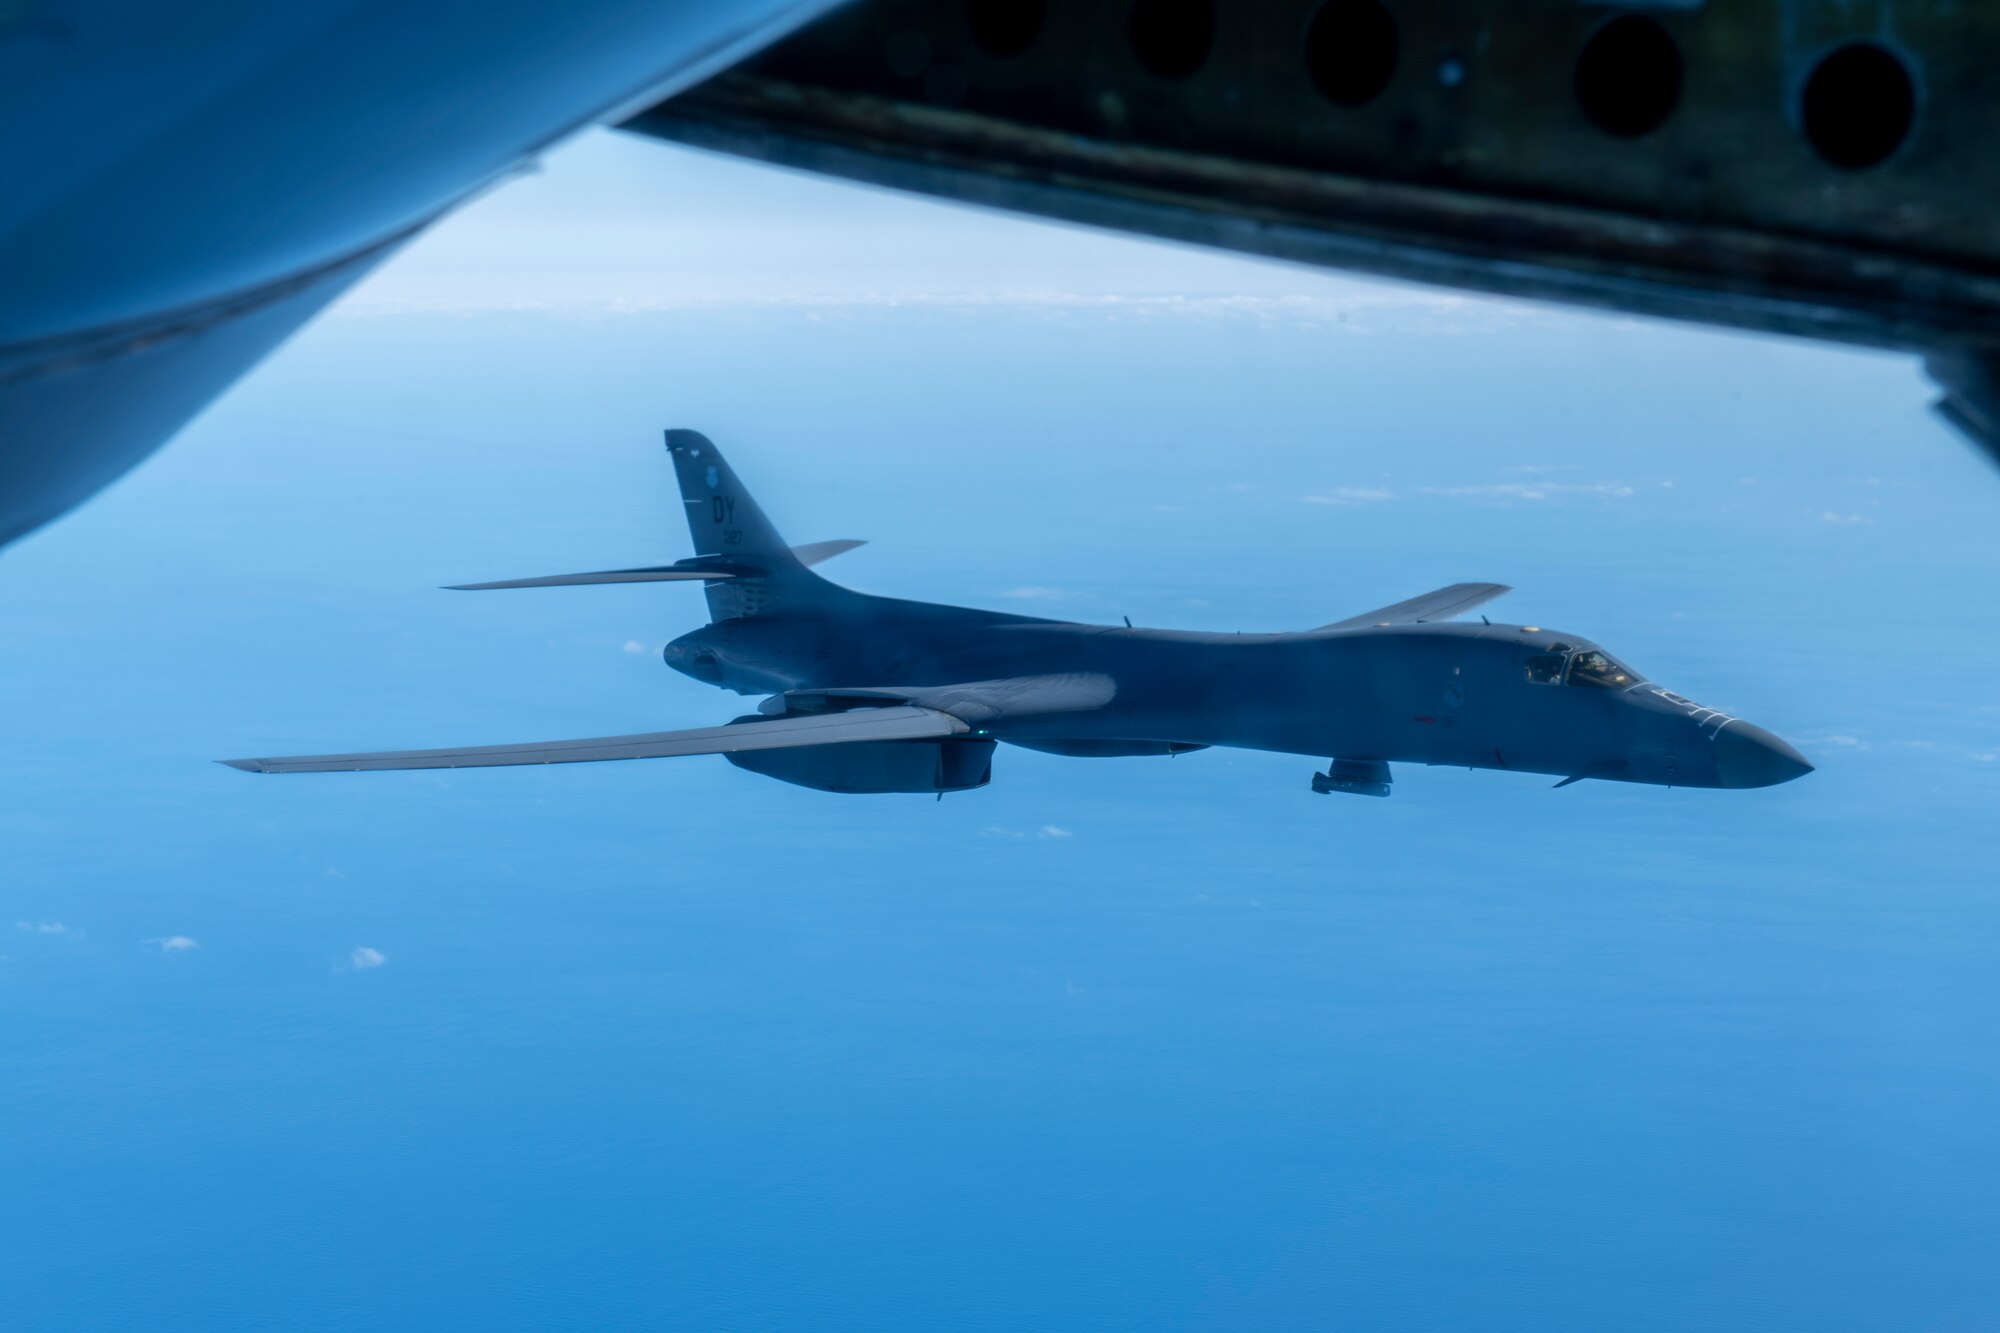 A B-1B Lancer from the 7th Bomb Wing, Dyess Air Force Base, Texas, departs after receiving fuel over the Pacific Ocean during a Bomber Task Force mission, Jan. 11, 2022. The flight included U.S. Air Force B-1 Lancers that integrated with Japan Air Self-Defense Force aircraft. Bomber missions such as these provide opportunities to train and work with our allies and partners in joint and coalition operations and exercises. (U.S. Air Force photo by Airman 1st Class Moses Taylor)